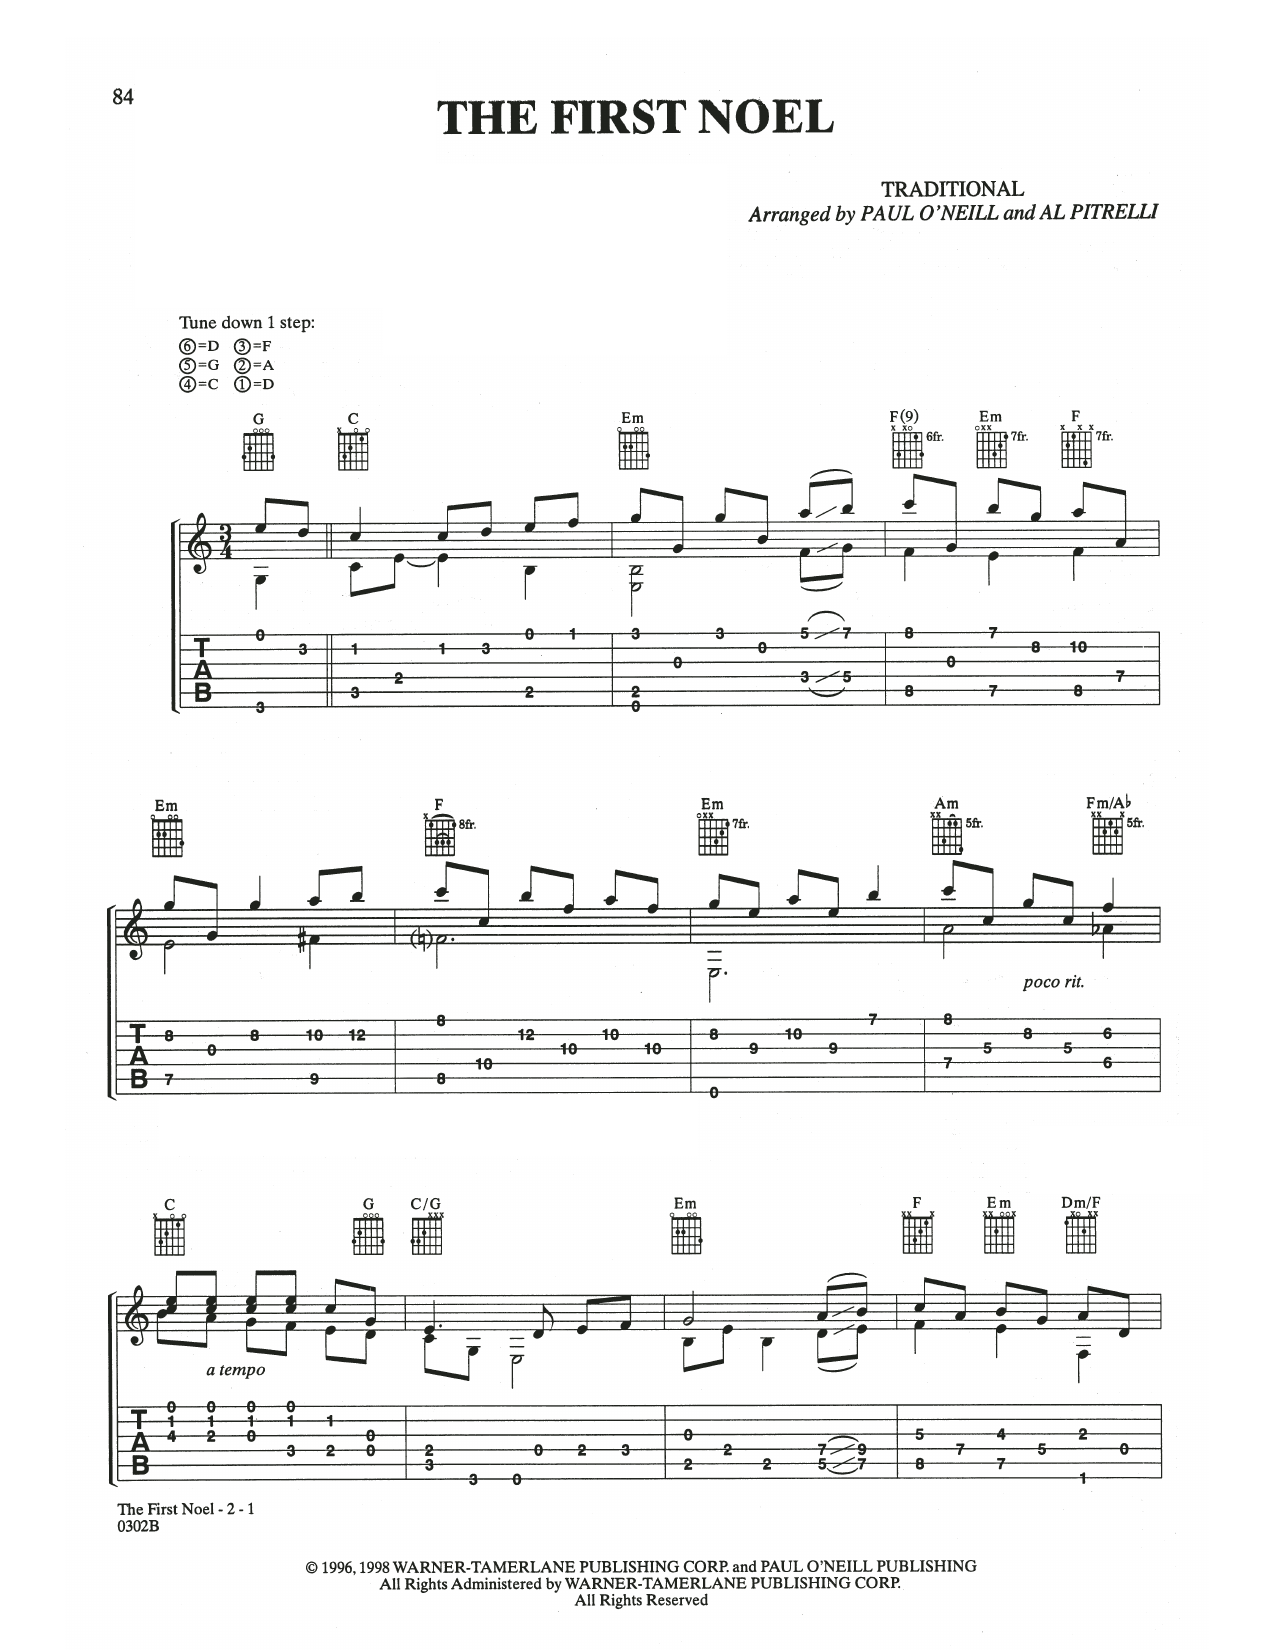 Download Trans-Siberian Orchestra The First Noel Sheet Music